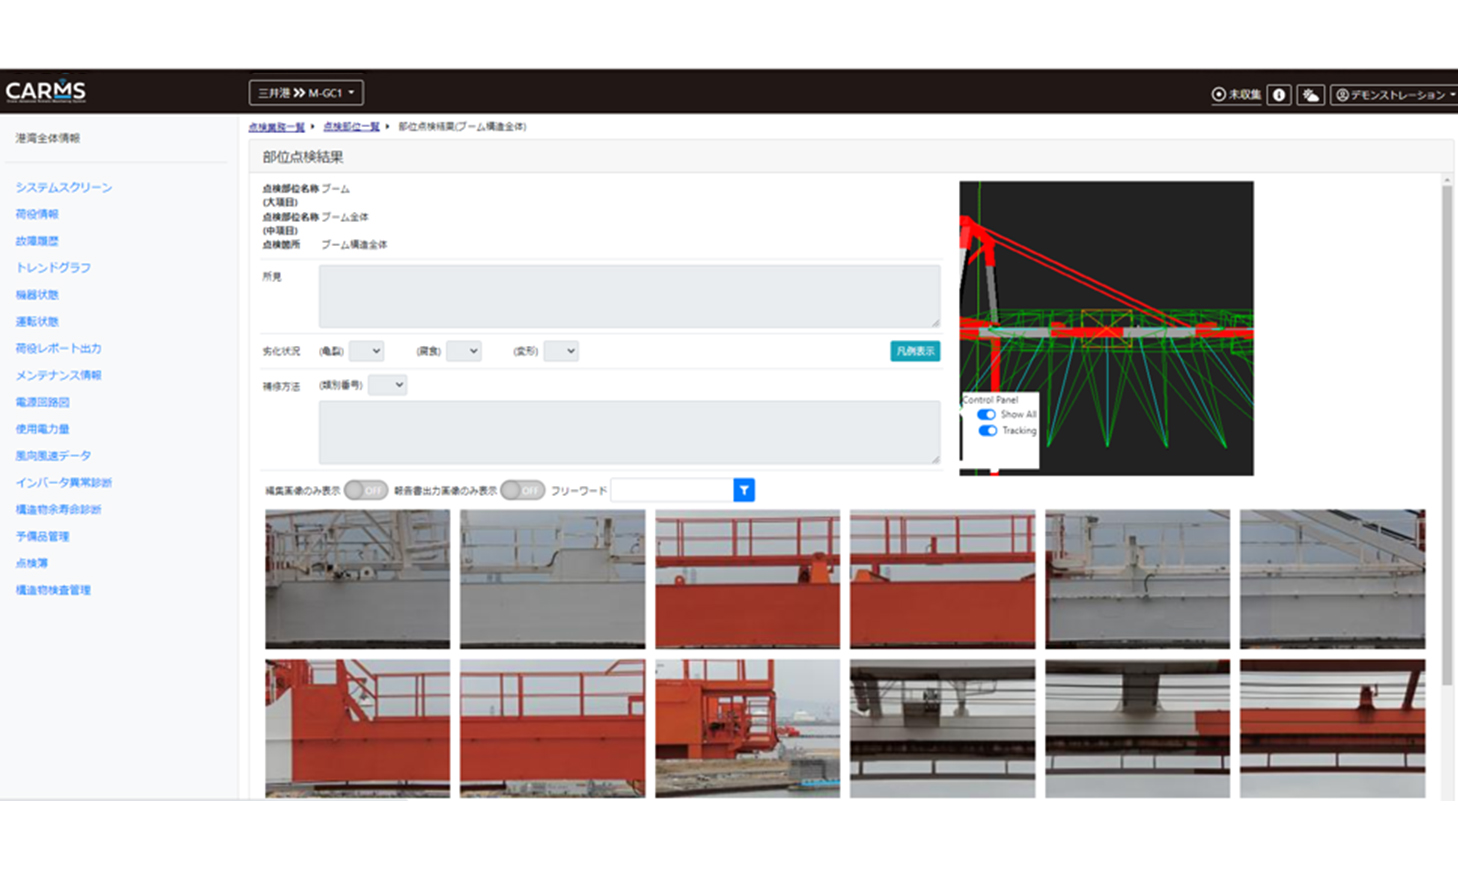 Structure Inspection Management System for Images Taken by Drone